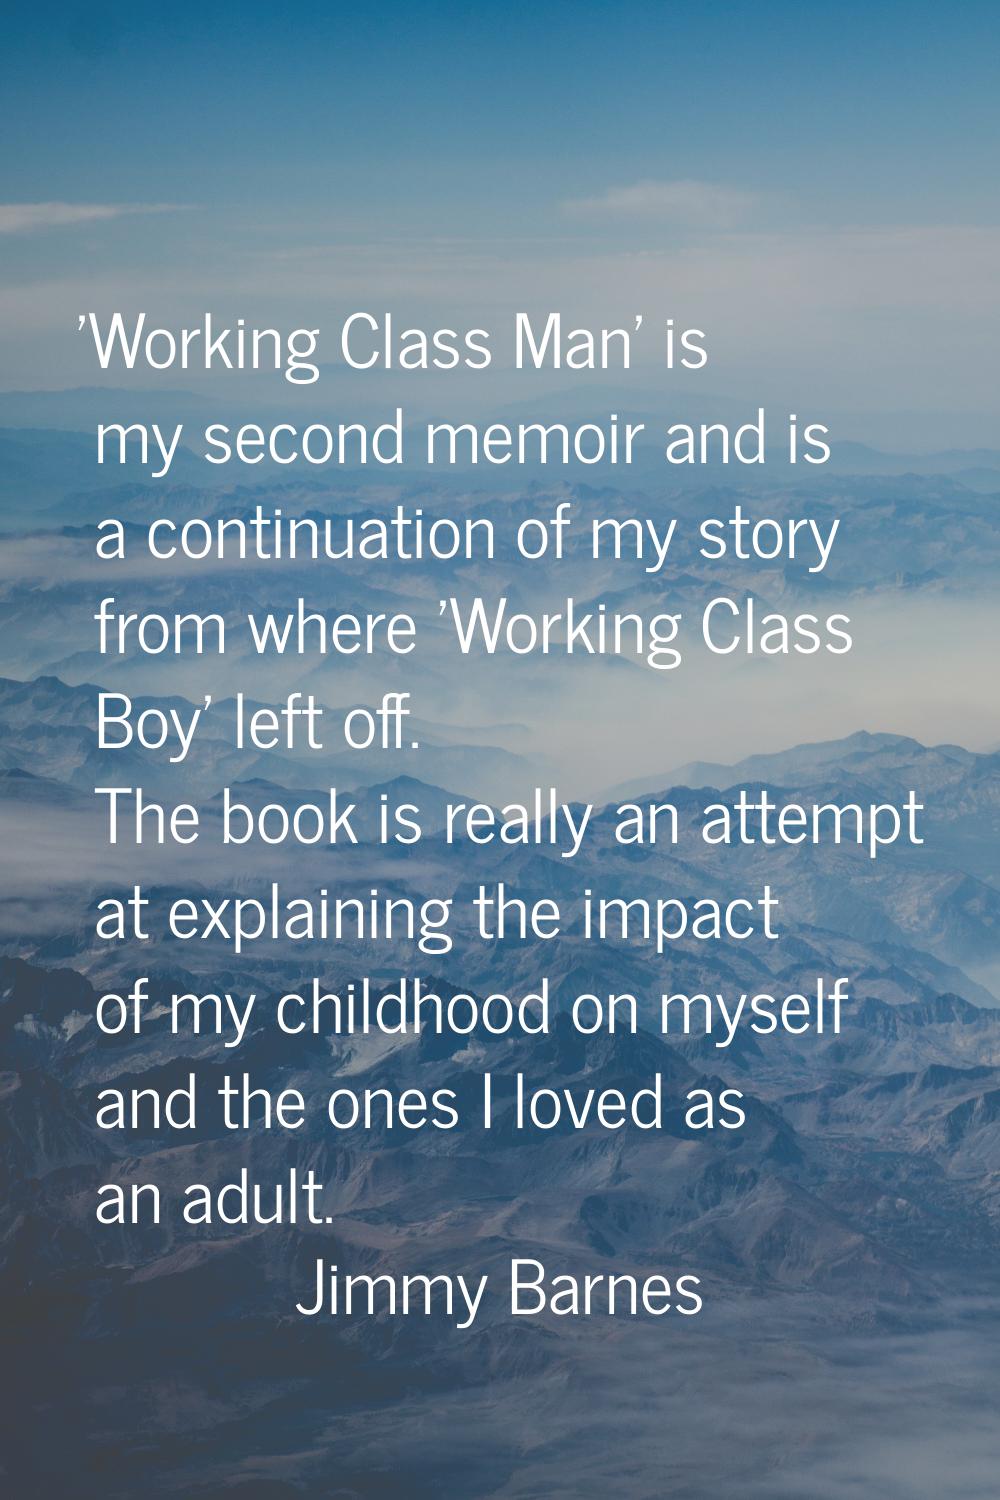 'Working Class Man' is my second memoir and is a continuation of my story from where 'Working Class